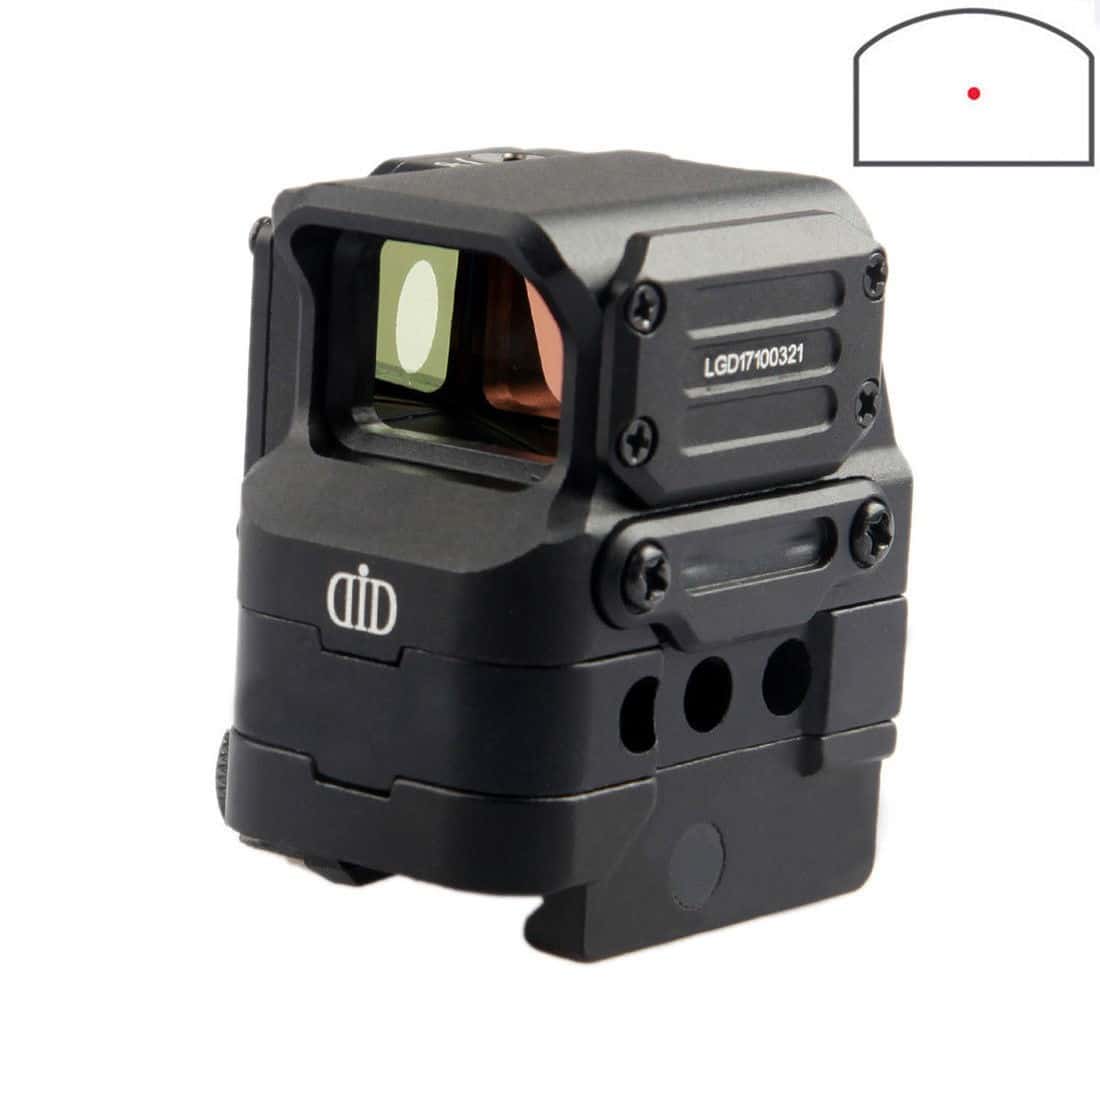 FC1 style optical Red dot sight - Black